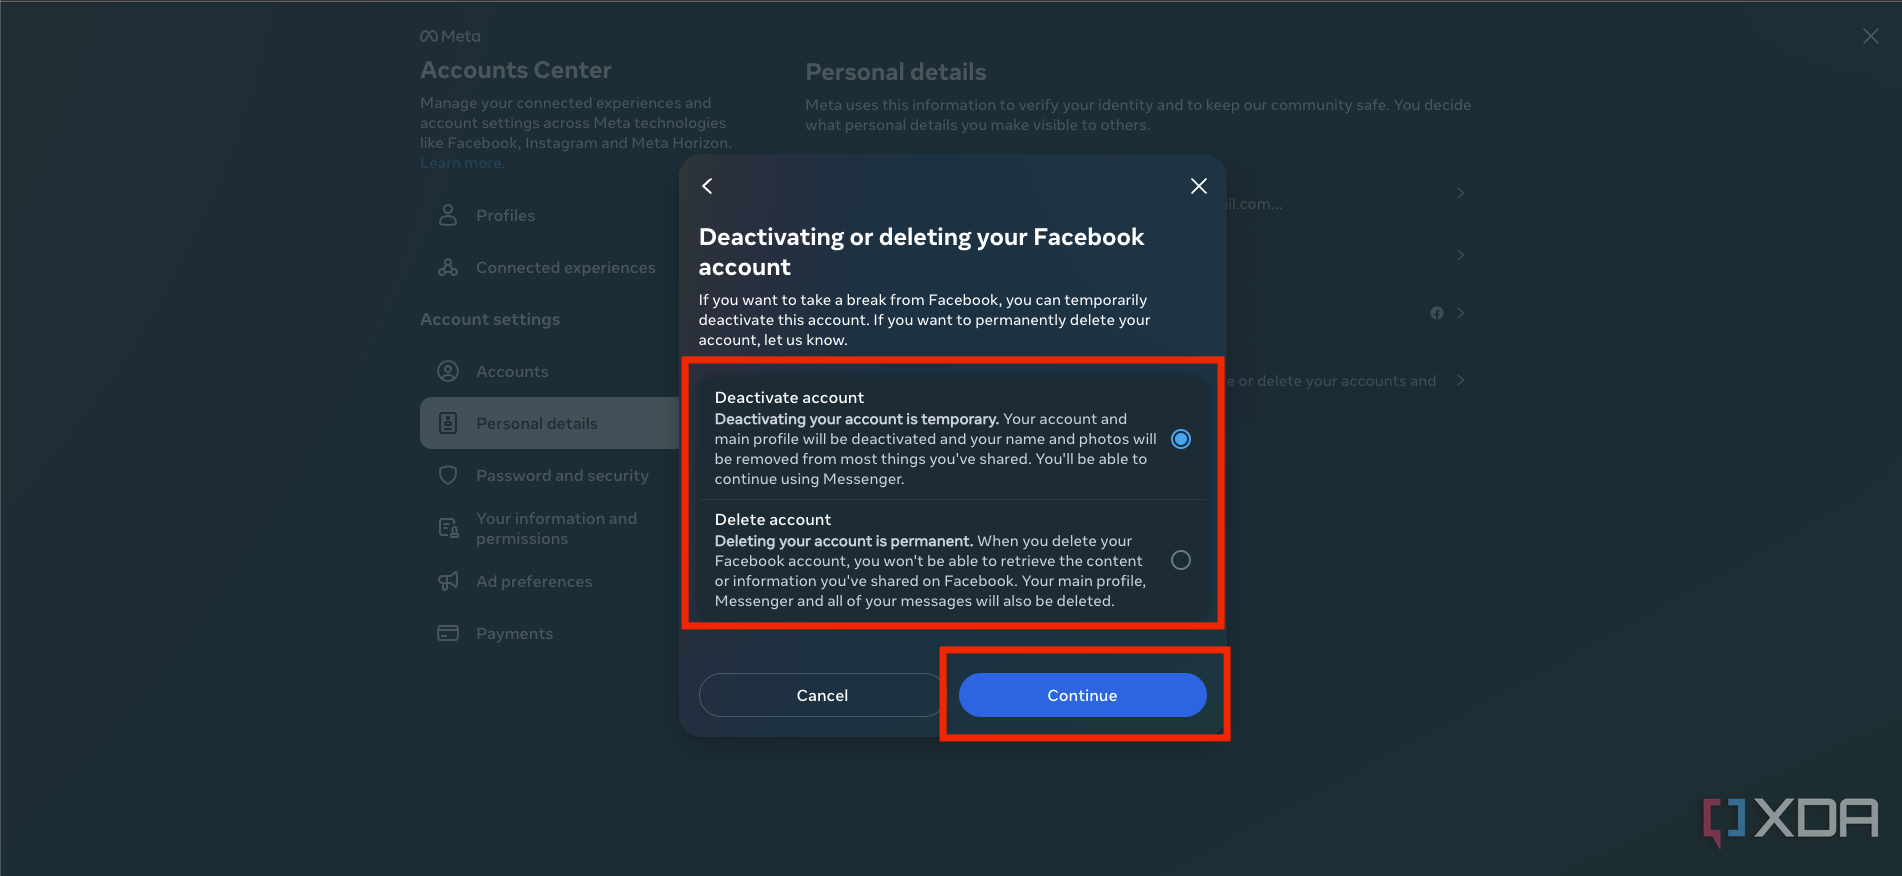 Screenshot showing the final confirmation of account deletion or deactivation on Facebook.